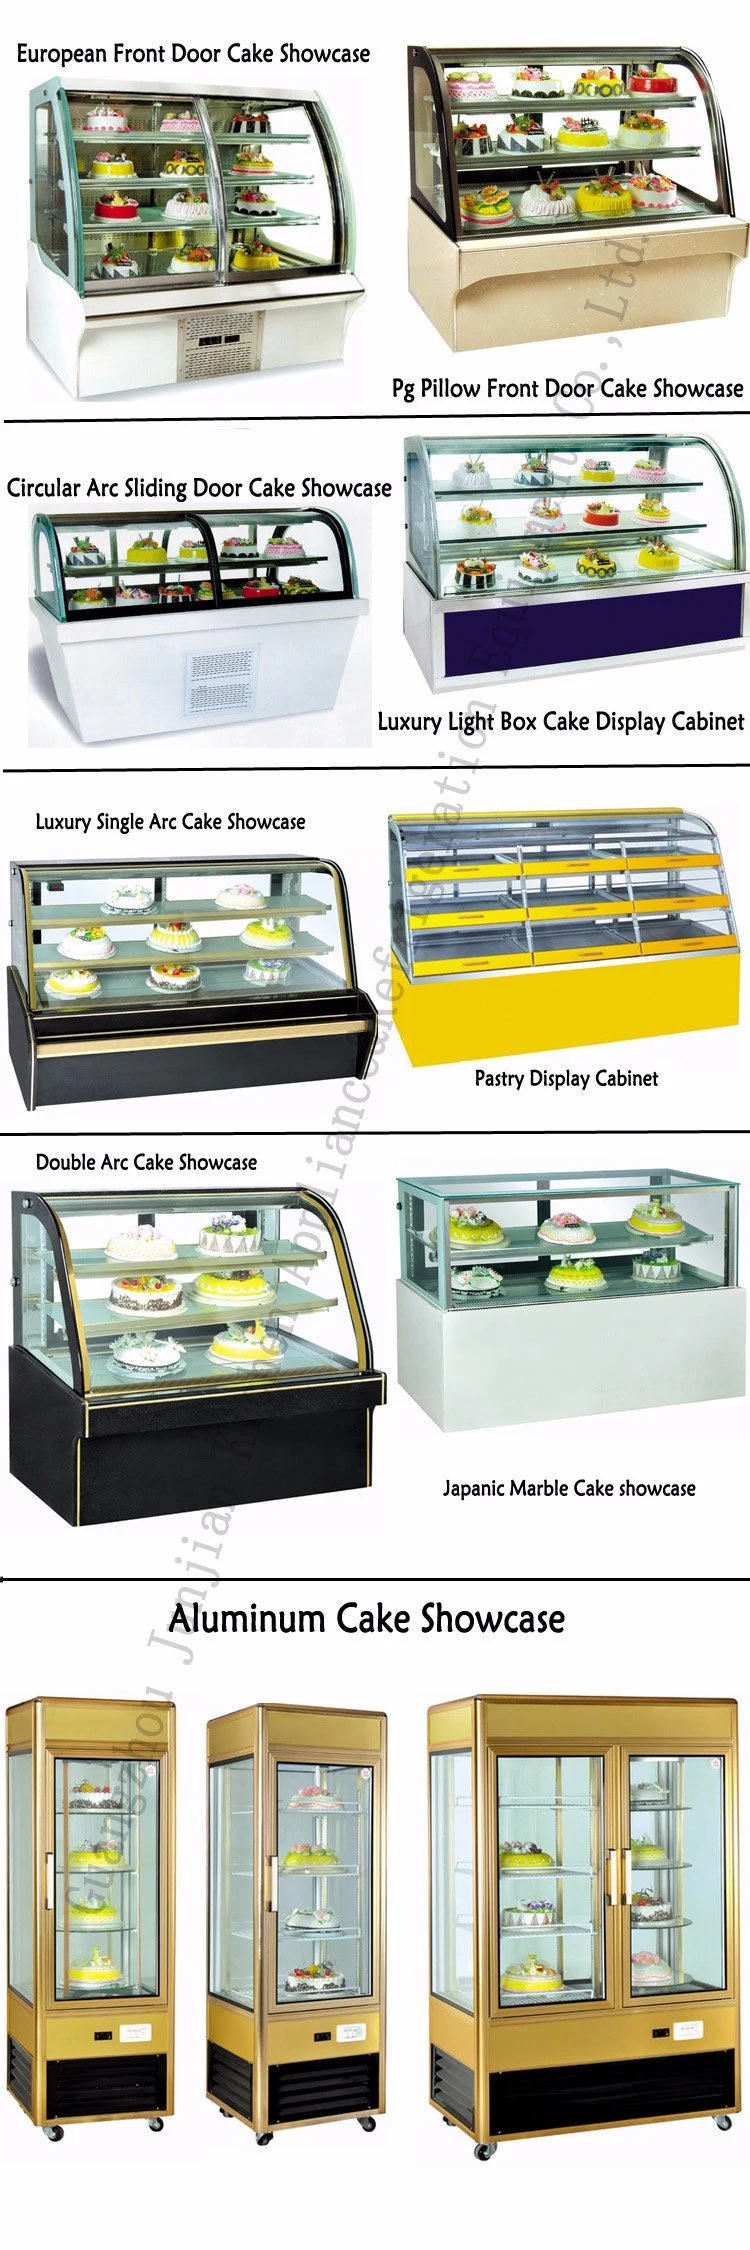 Right Angle Commercial Stainless Steel Corner Cake Display Showcase/Cabinet (AT-1500/1800/2000)